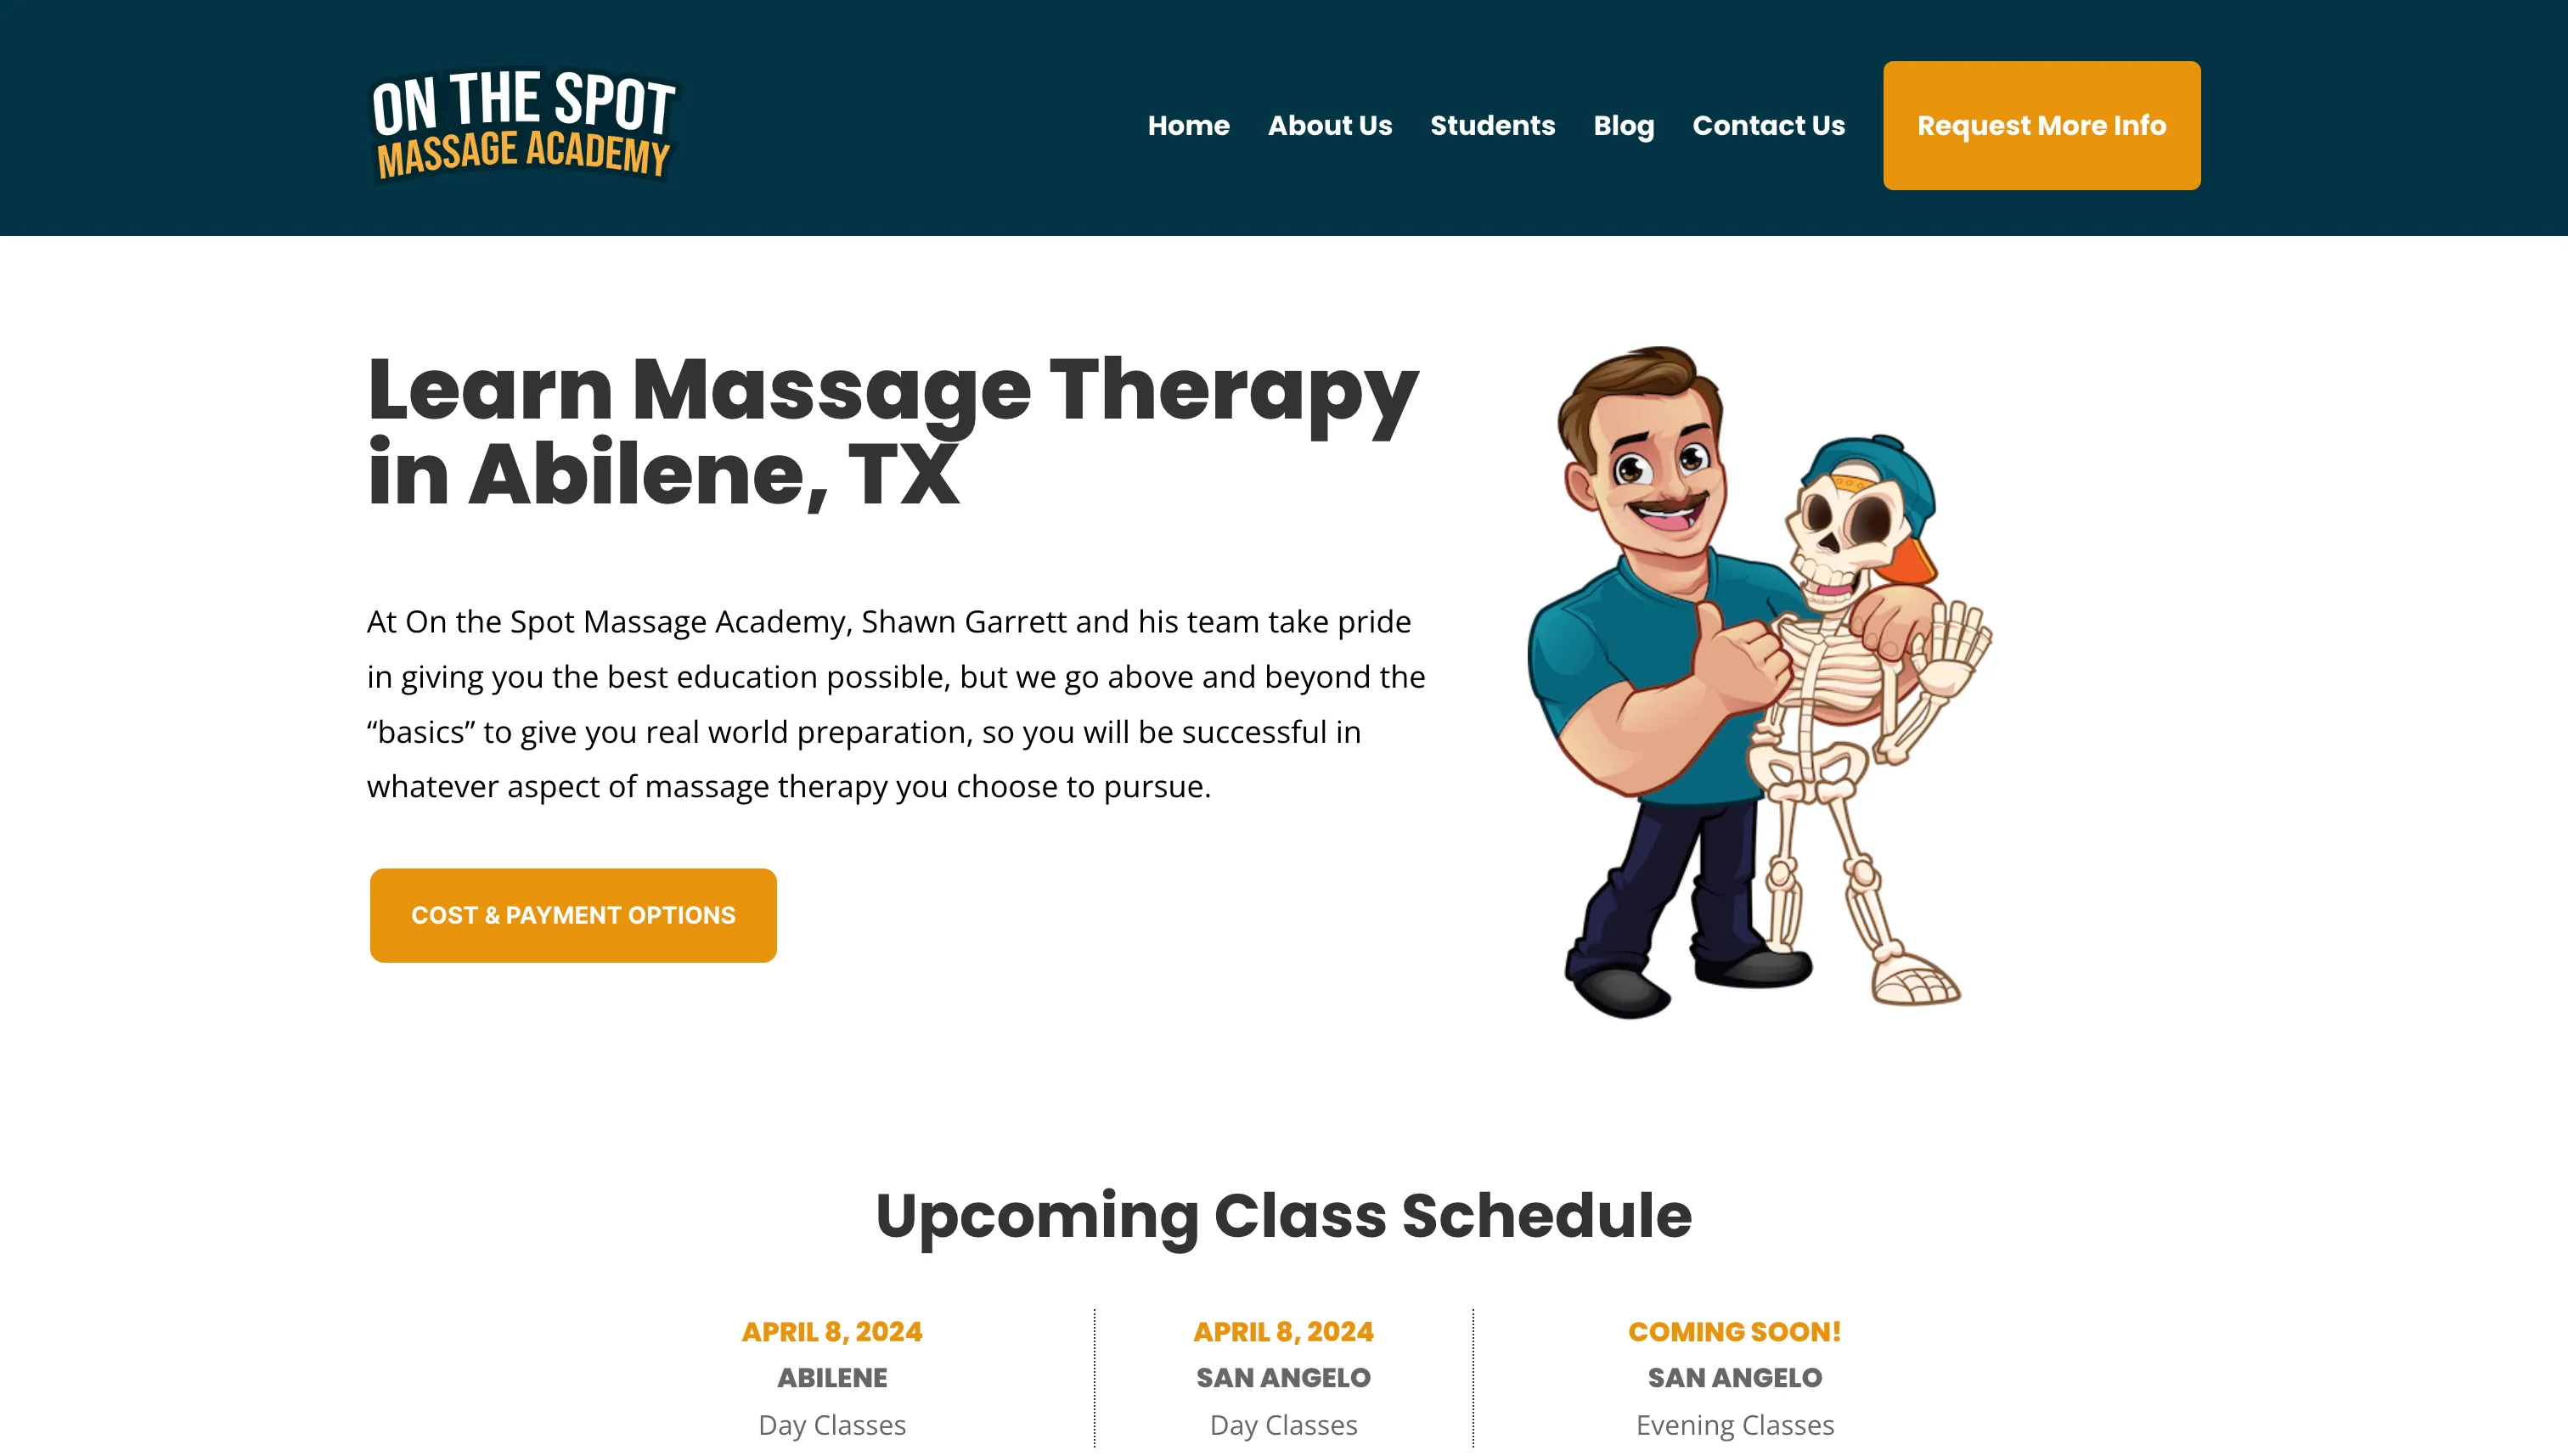 On The Spot Massage Academy home page